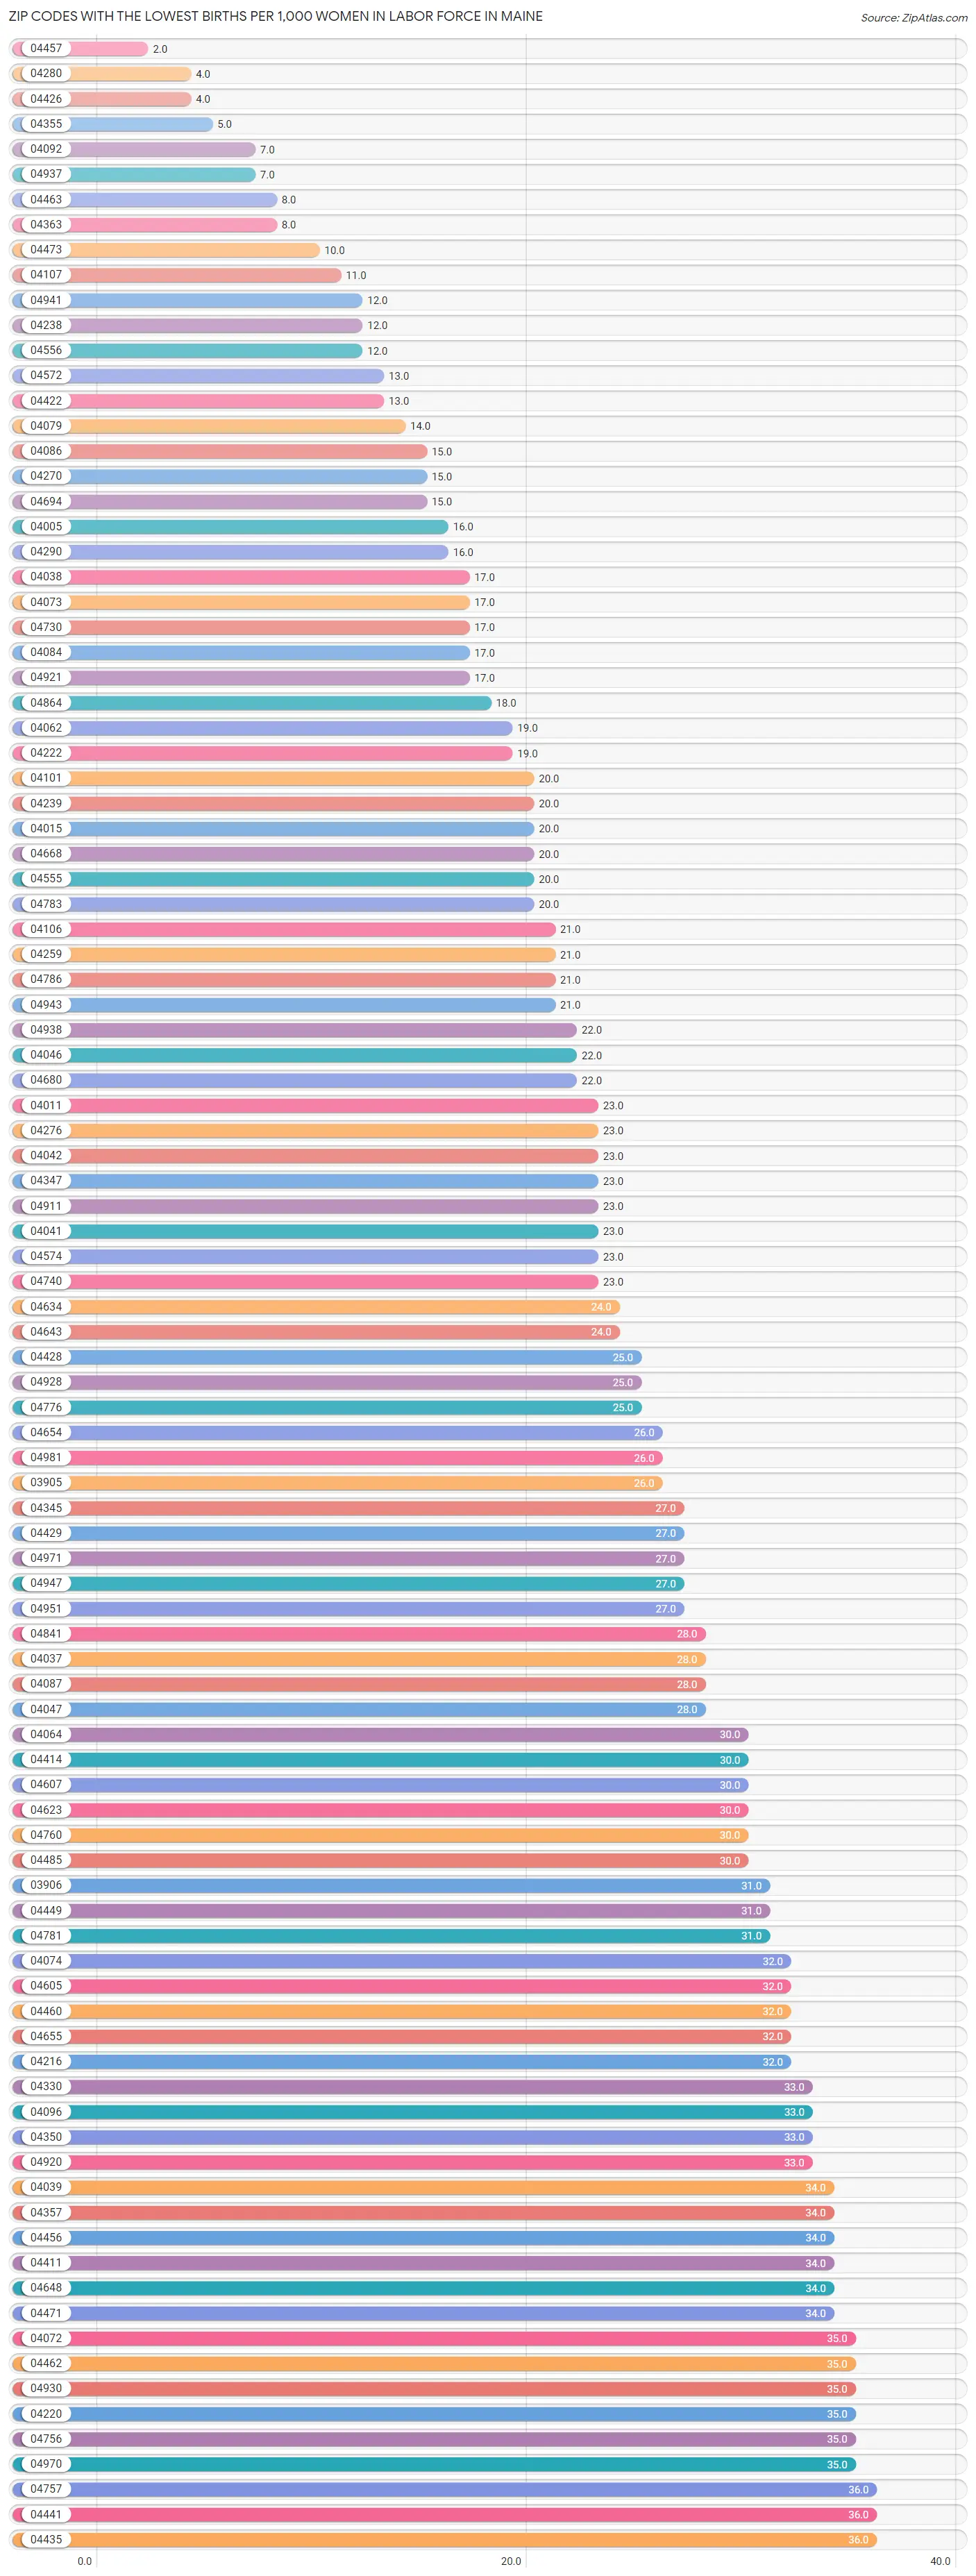 Zip Codes with the Lowest Births per 1,000 Women in Labor Force in Maine Chart